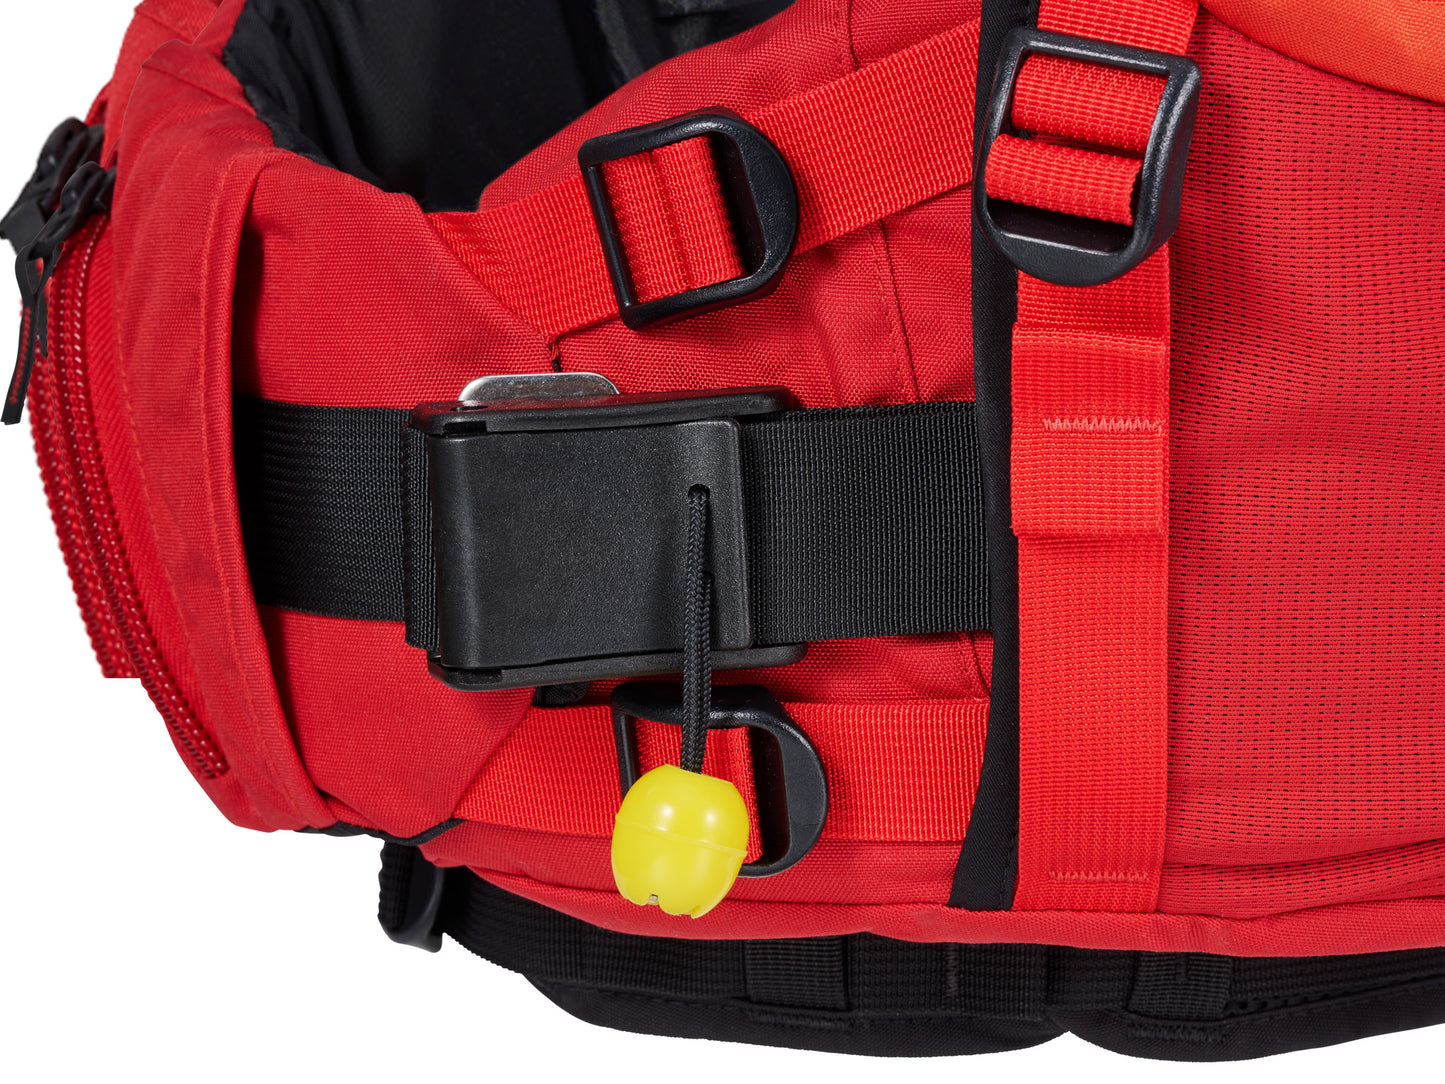 Astral's Indus High Float Rescue PFD with FoamTectonics™ technology in red and black colors, featuring a yellow strap.